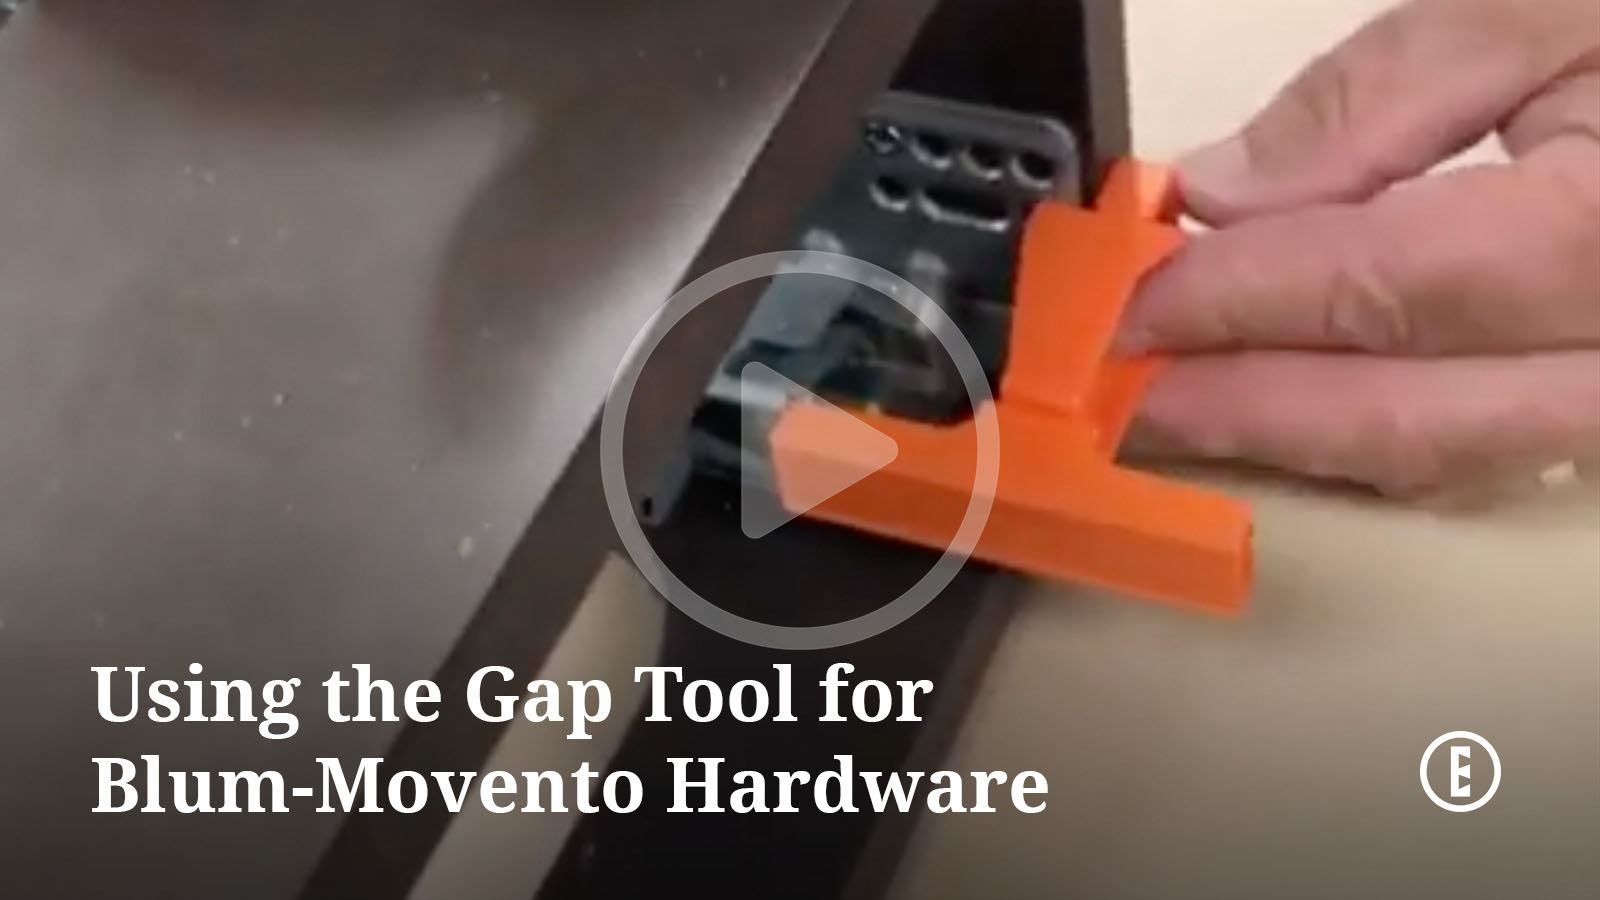 Video: Using the Gap Tool for Blum-Movento Hardware